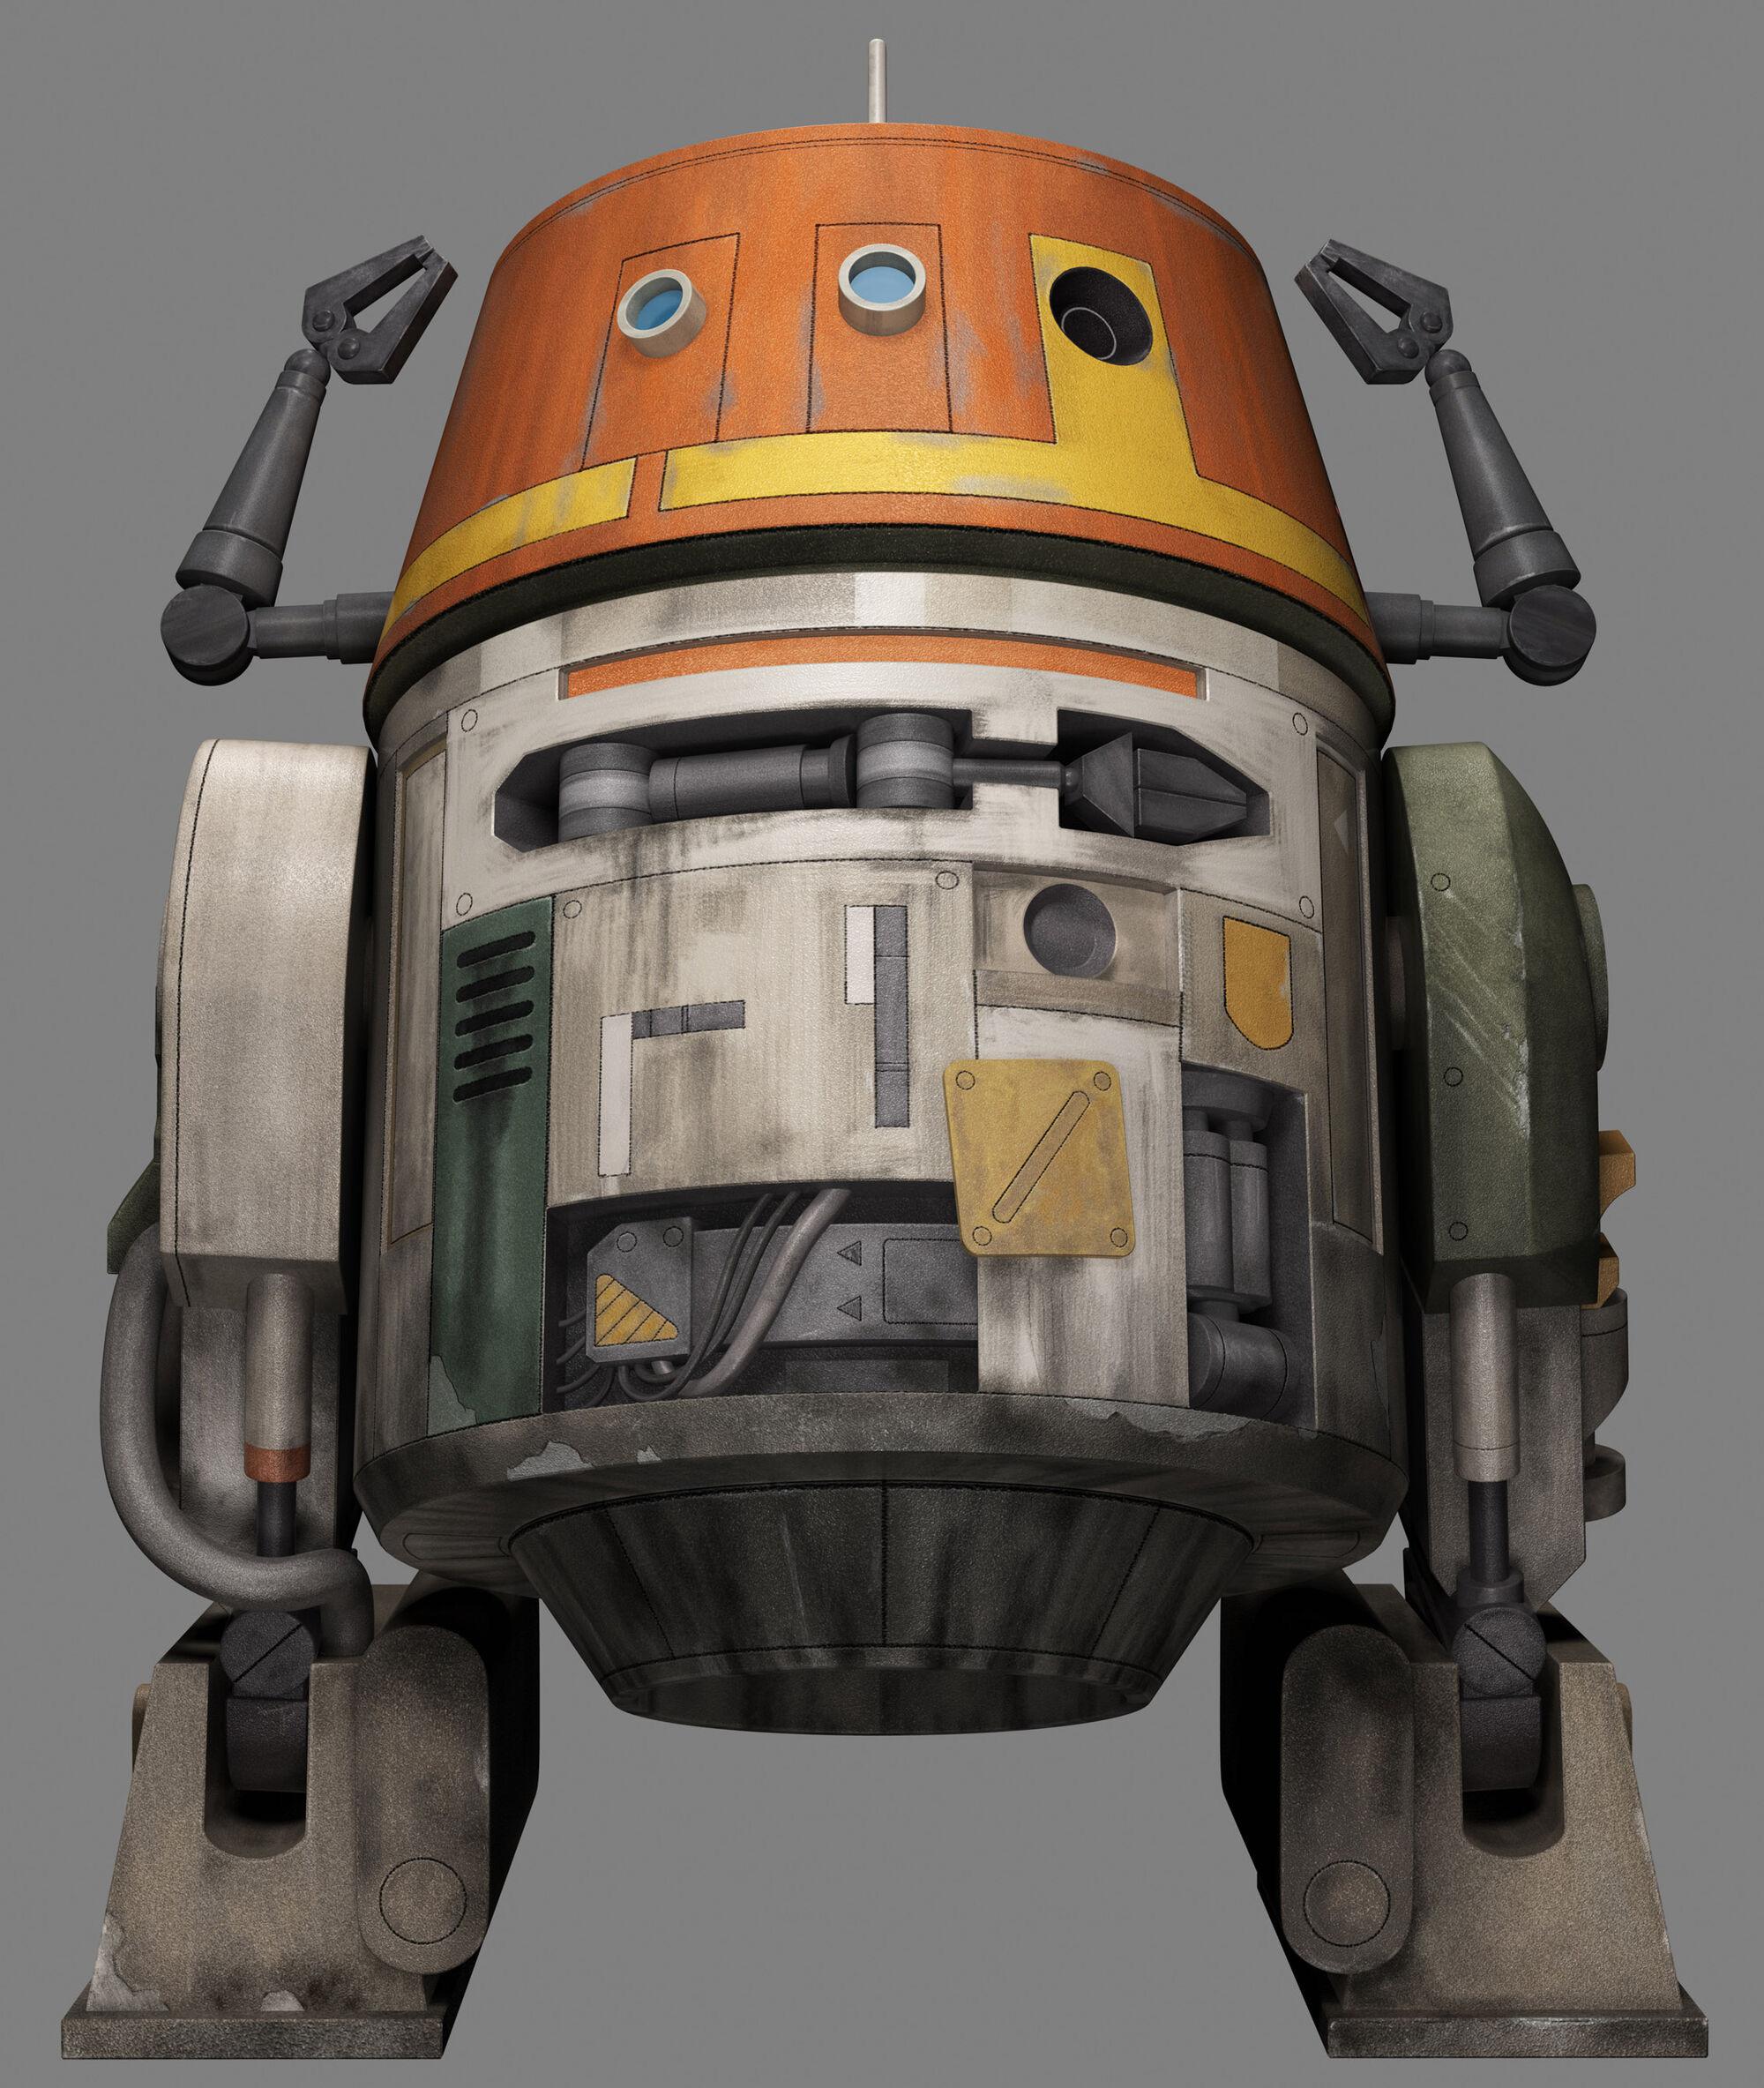 TIL That Chopper From Rebels Is Called That Because His Name, C1 10P, Looks Like The Word “CHOP”